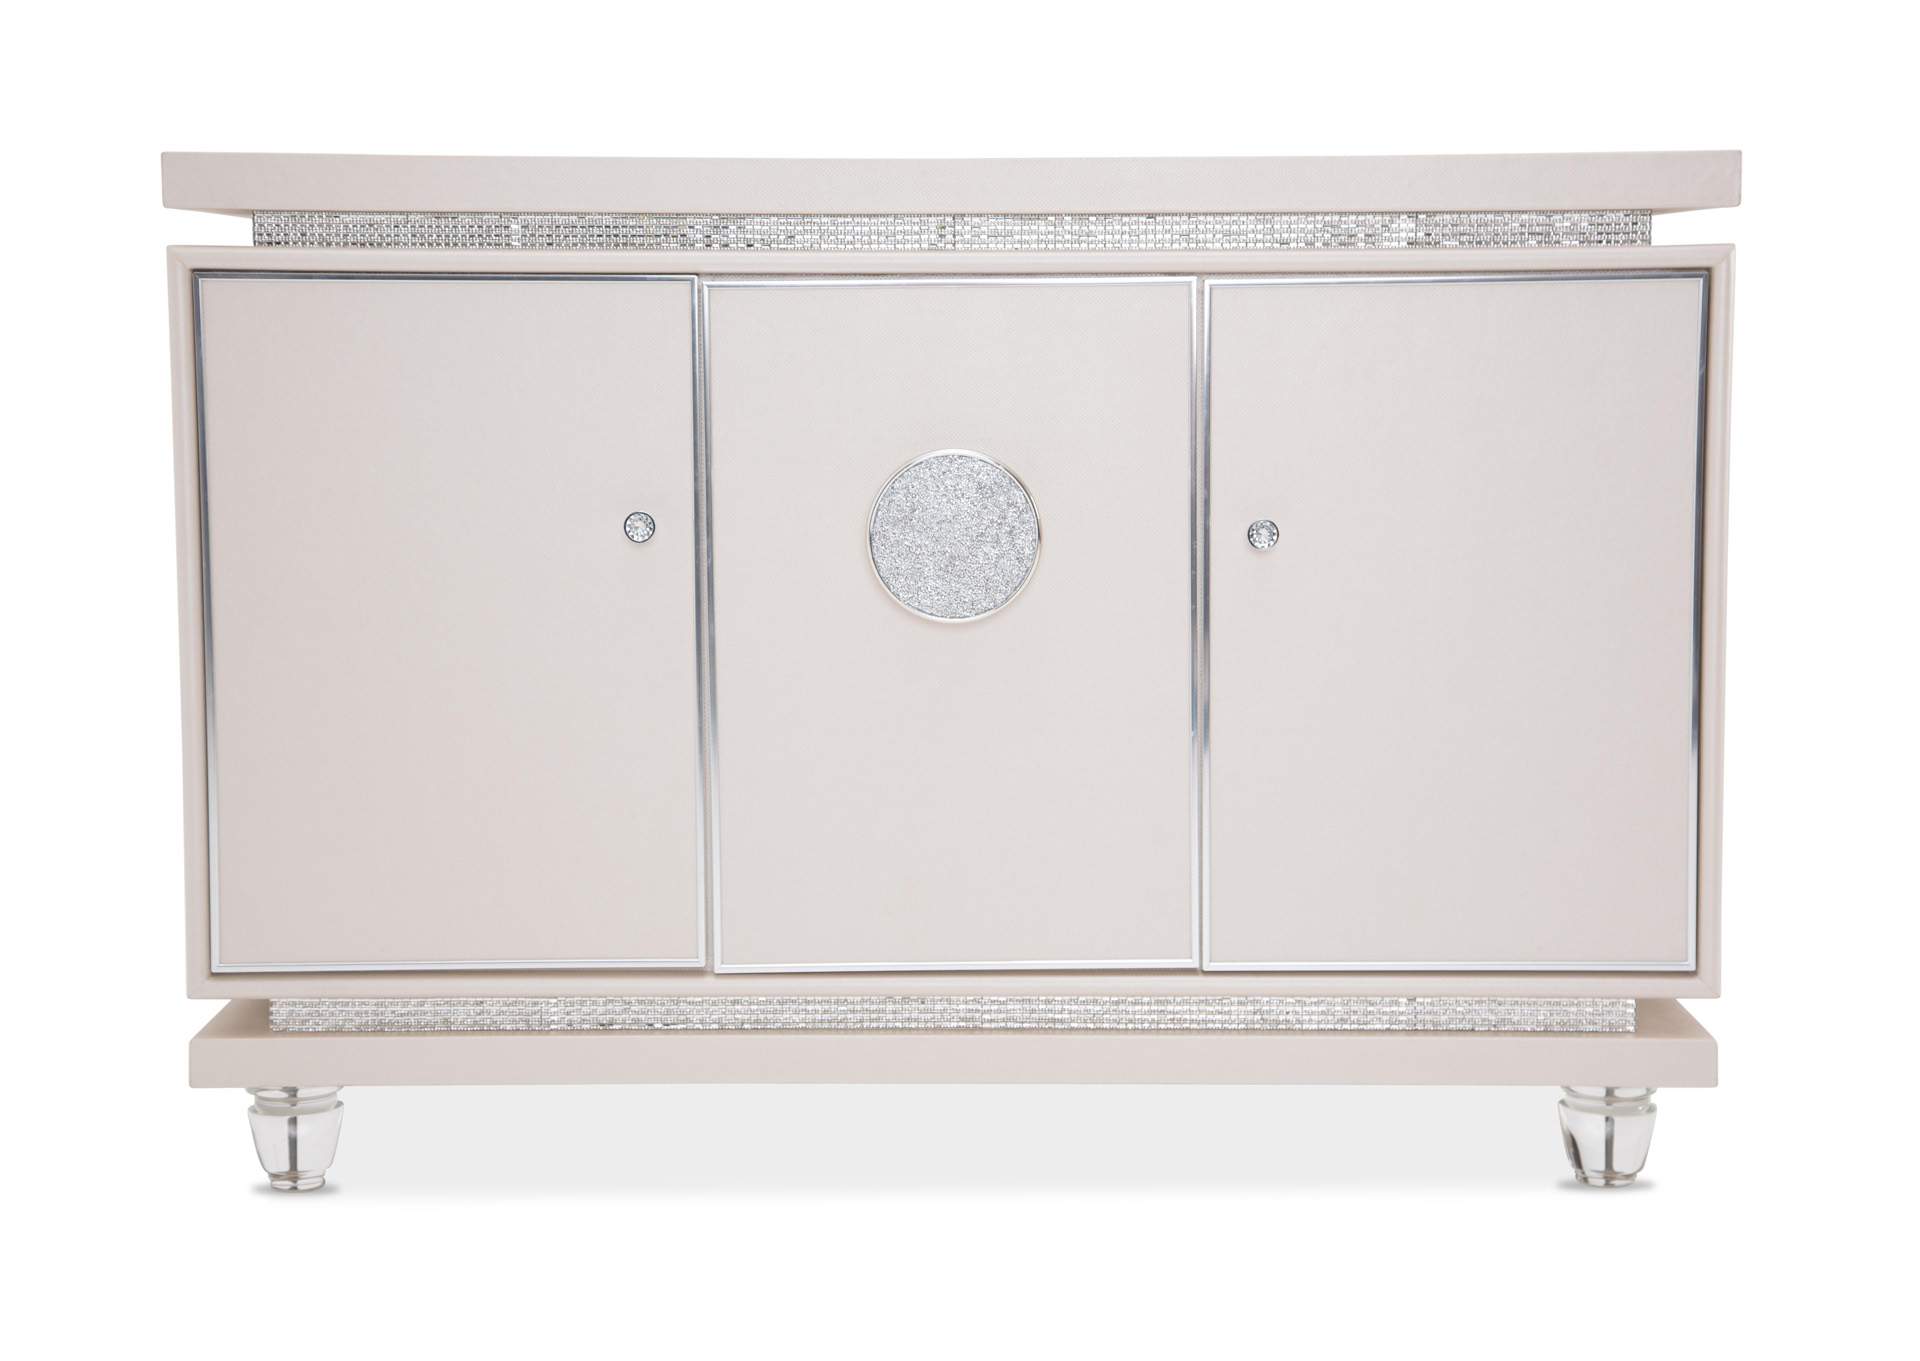 Glimmering Heights Sideboard Ivory,Michael Amini (AICO)